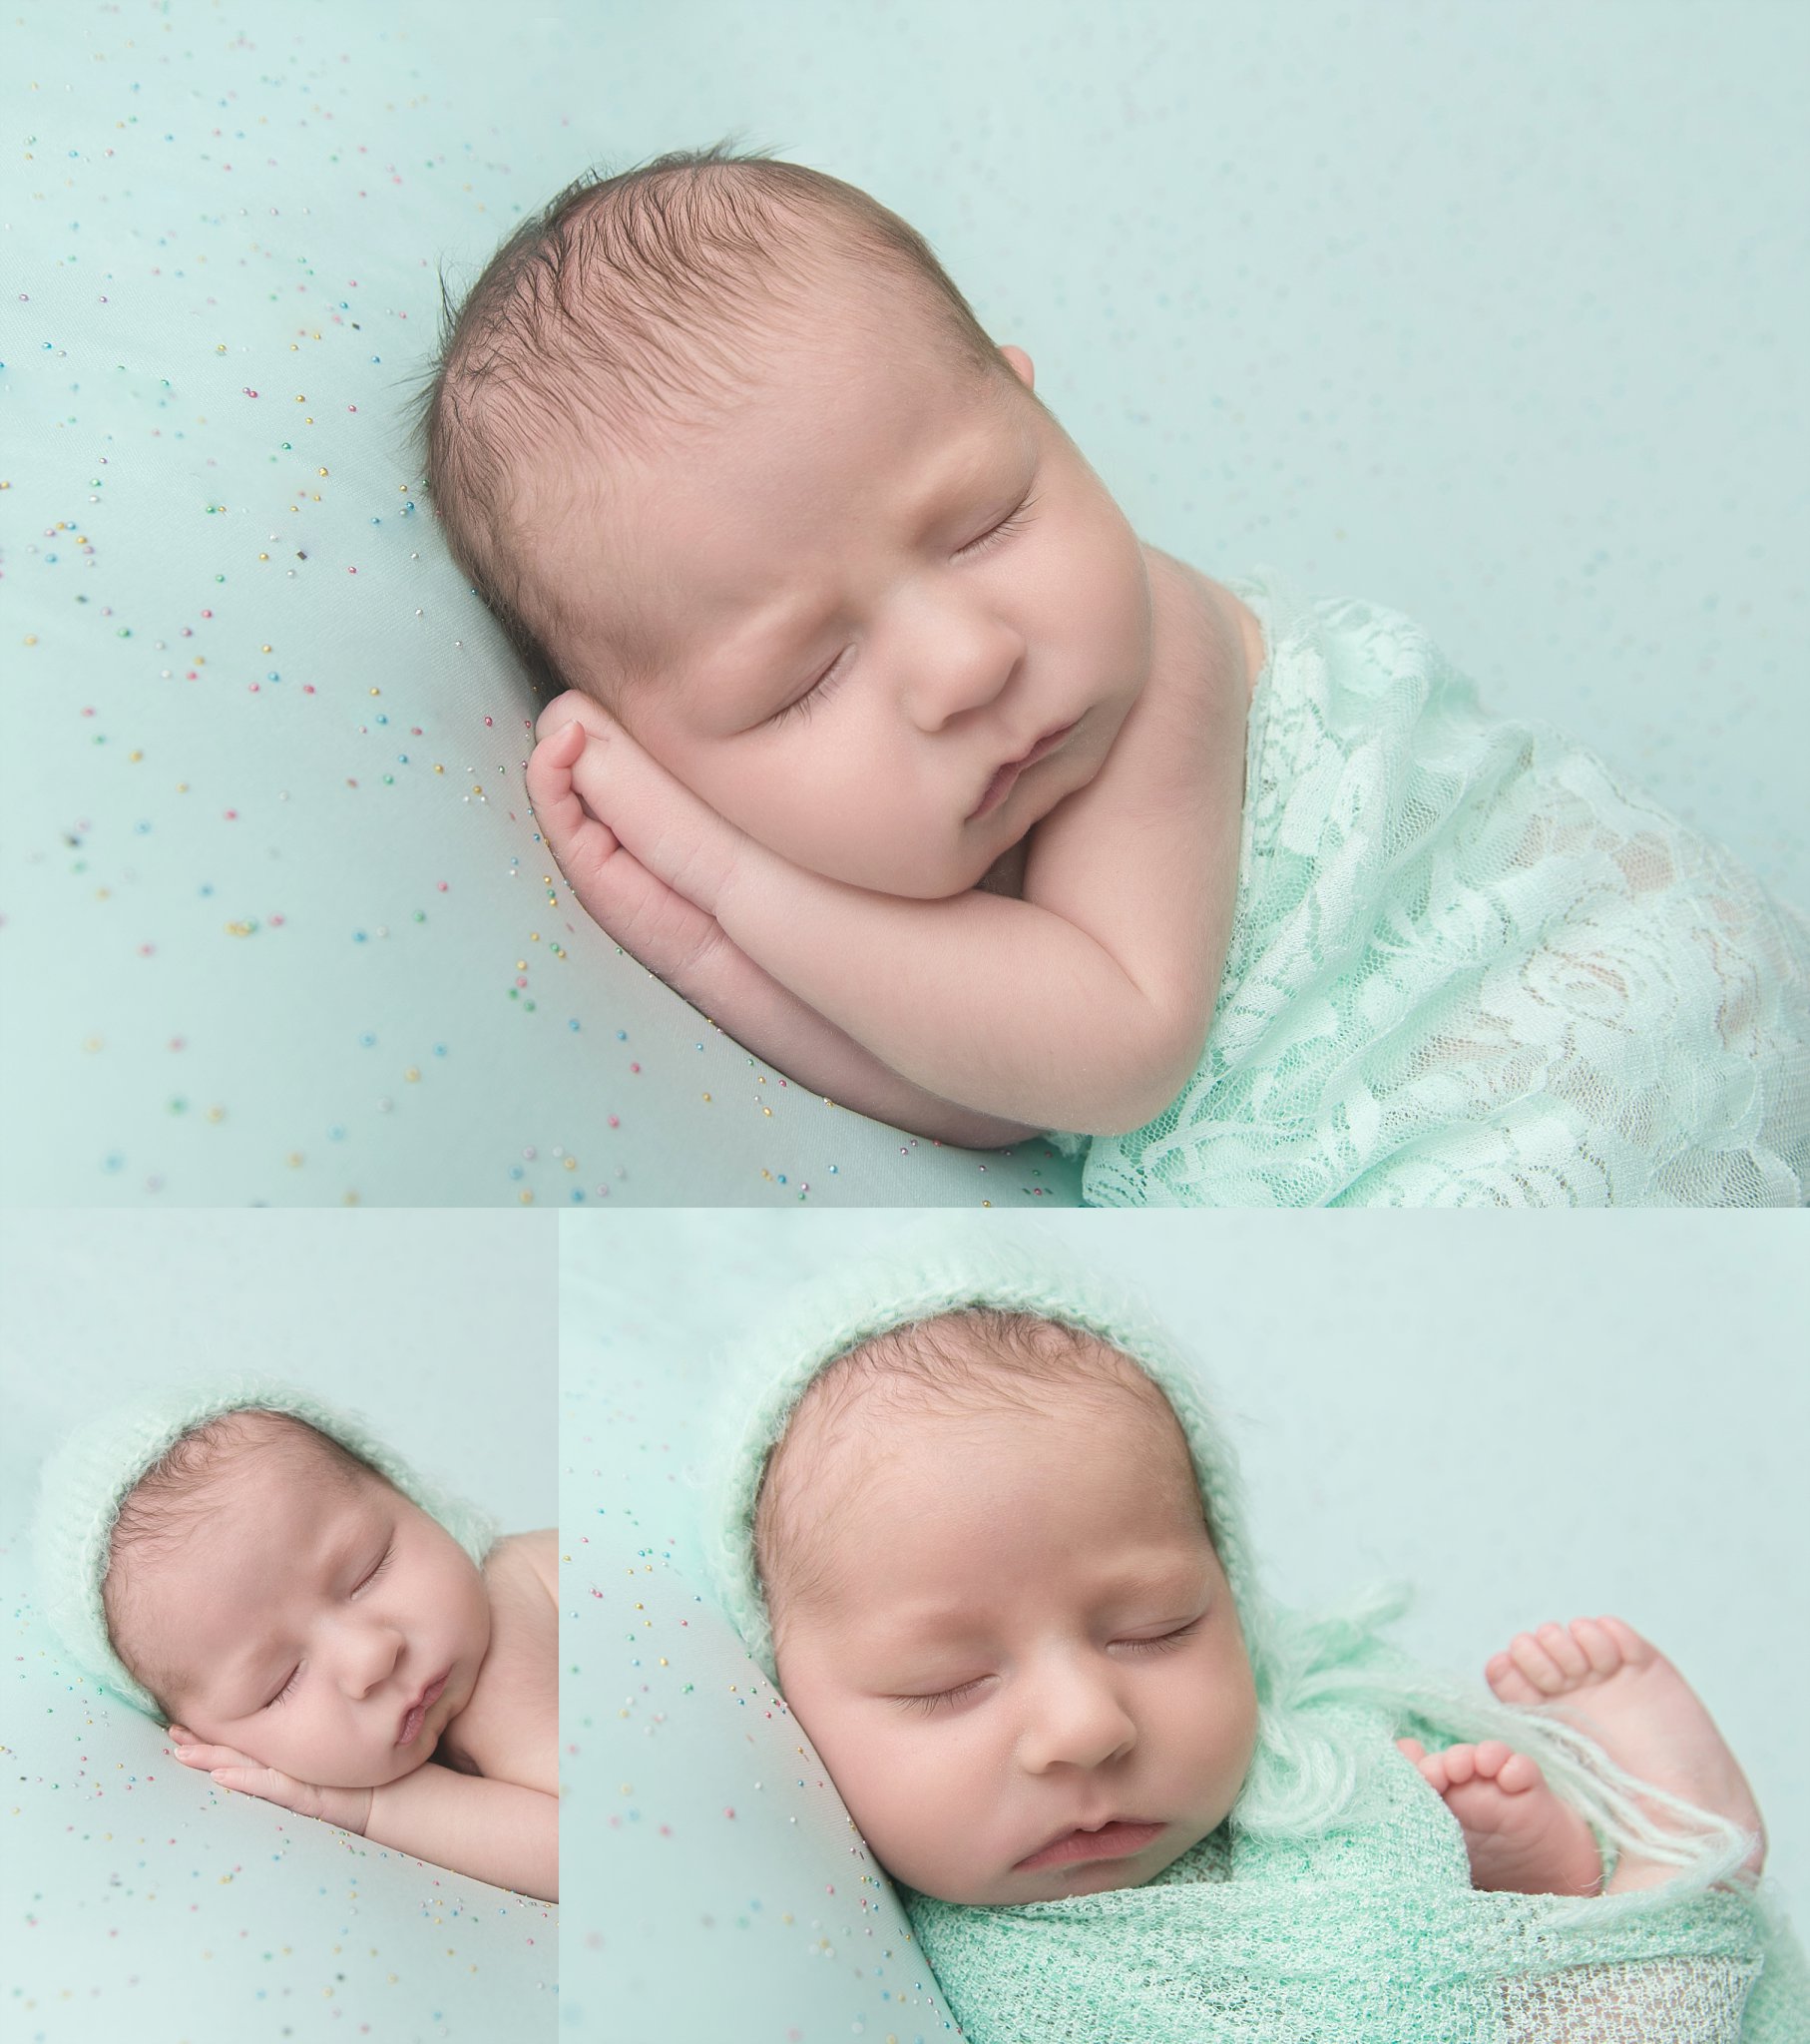 st-louis-newborn-photographer-baby-girl-on-mint-sparkle-background-with-lace-wrap-bonnet-collage.jpg